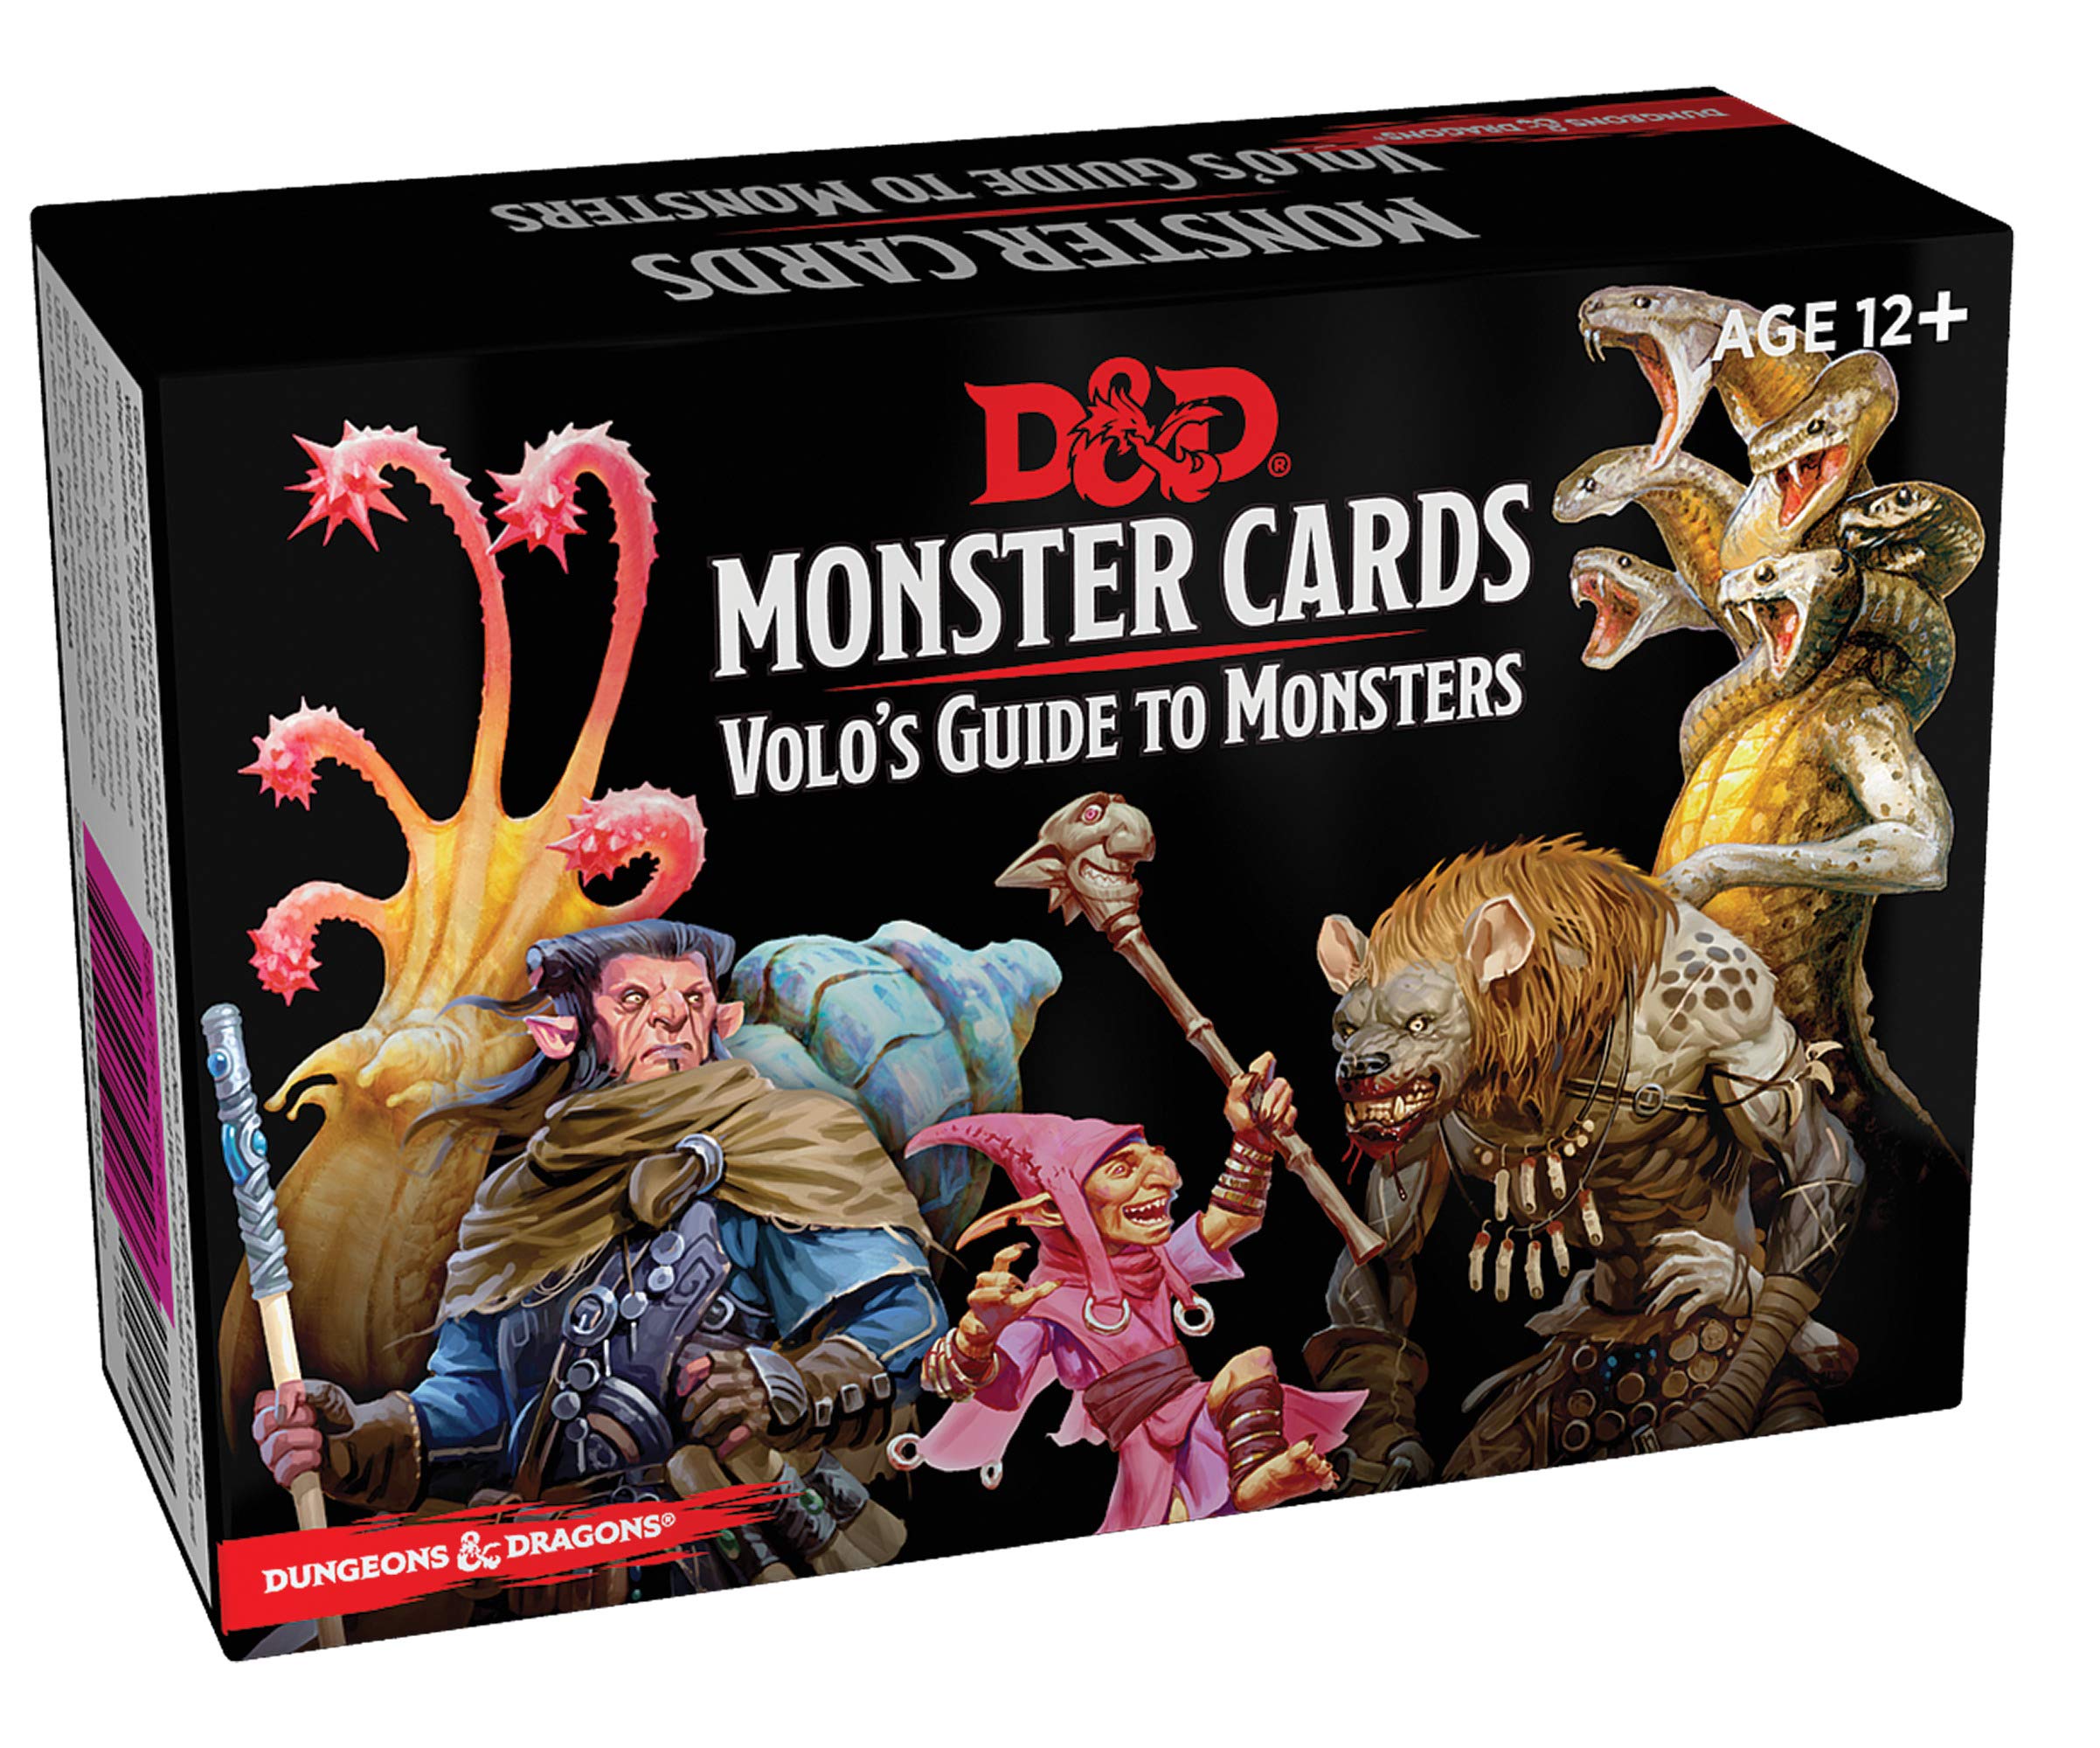 Dungeons & Dragons Monster Cards Volumeo's Guide To Monsters